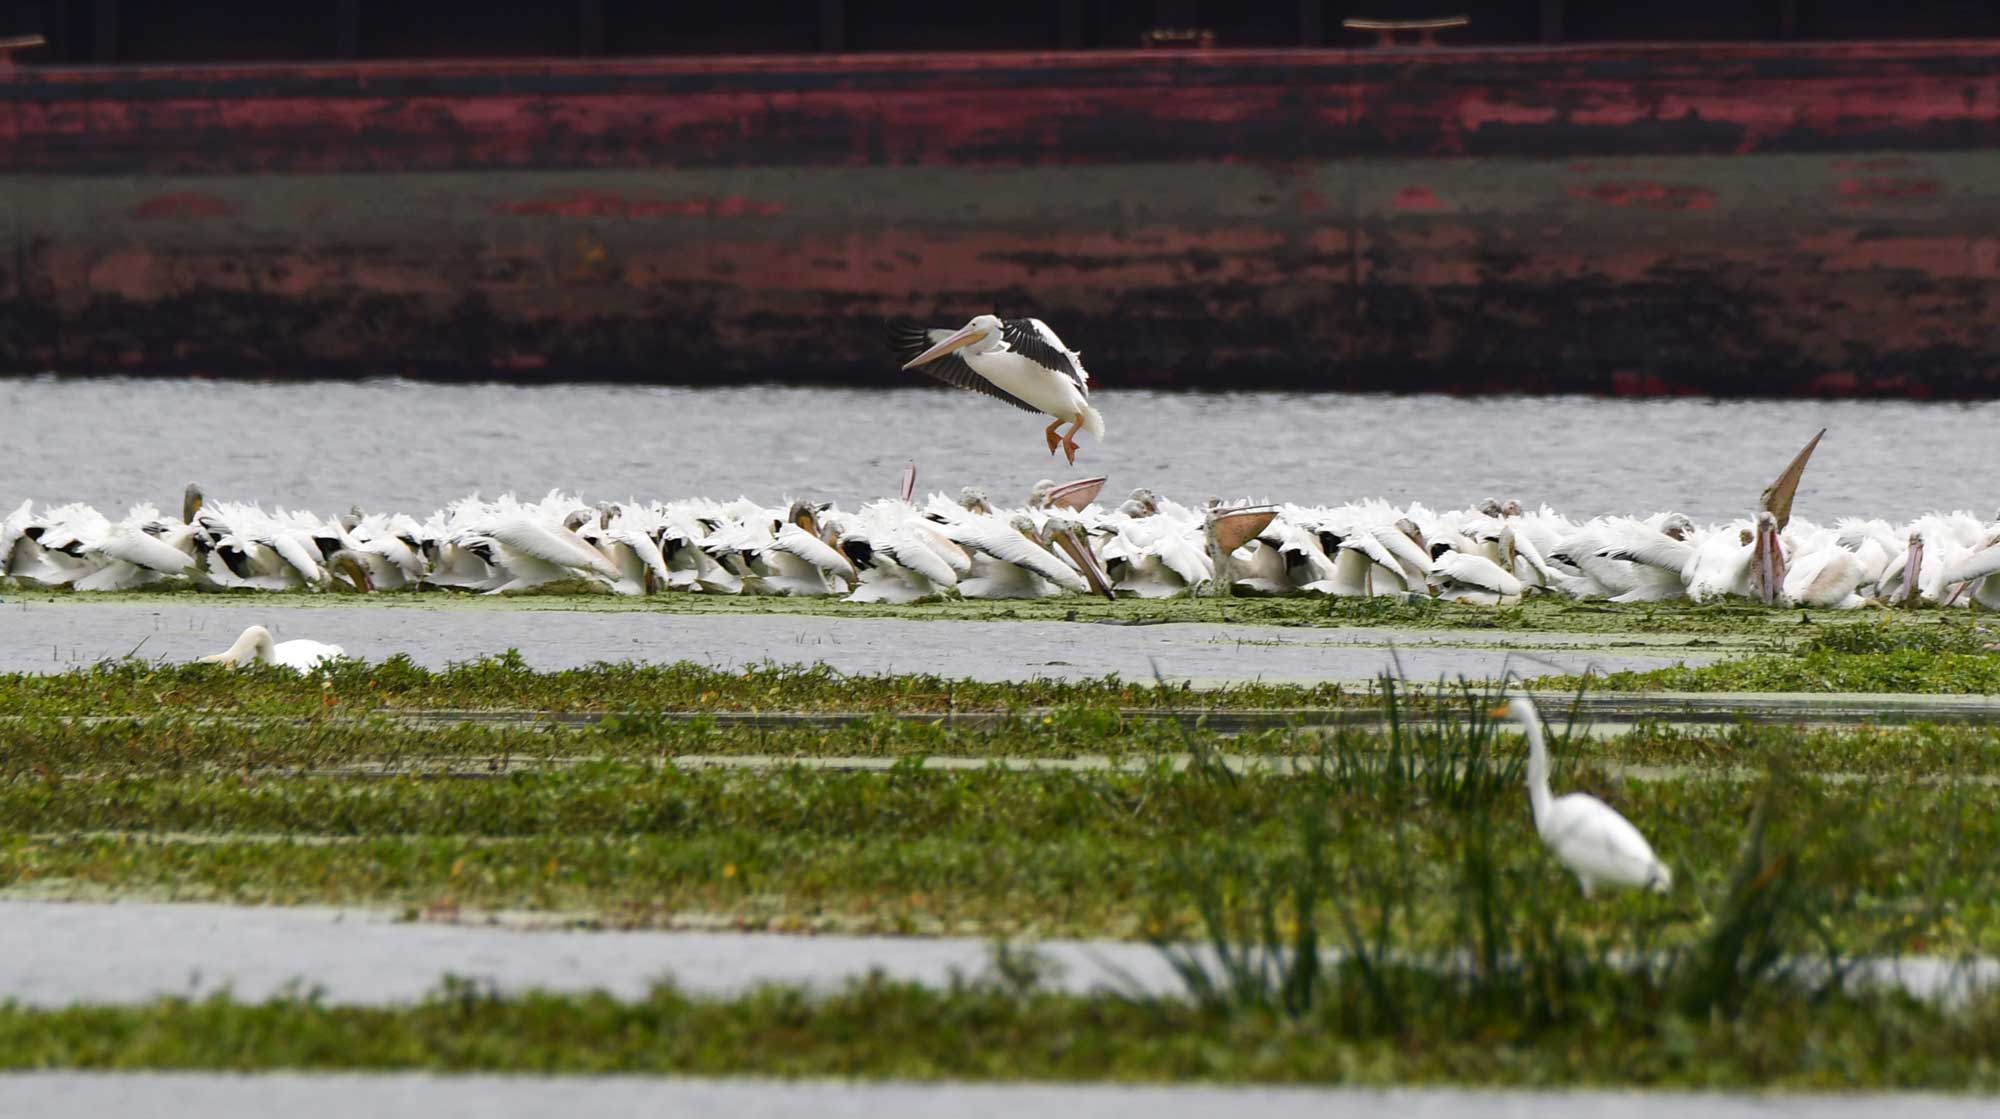 A pelican comes in for a landing on a river where hundreds of other pelicans are floating.